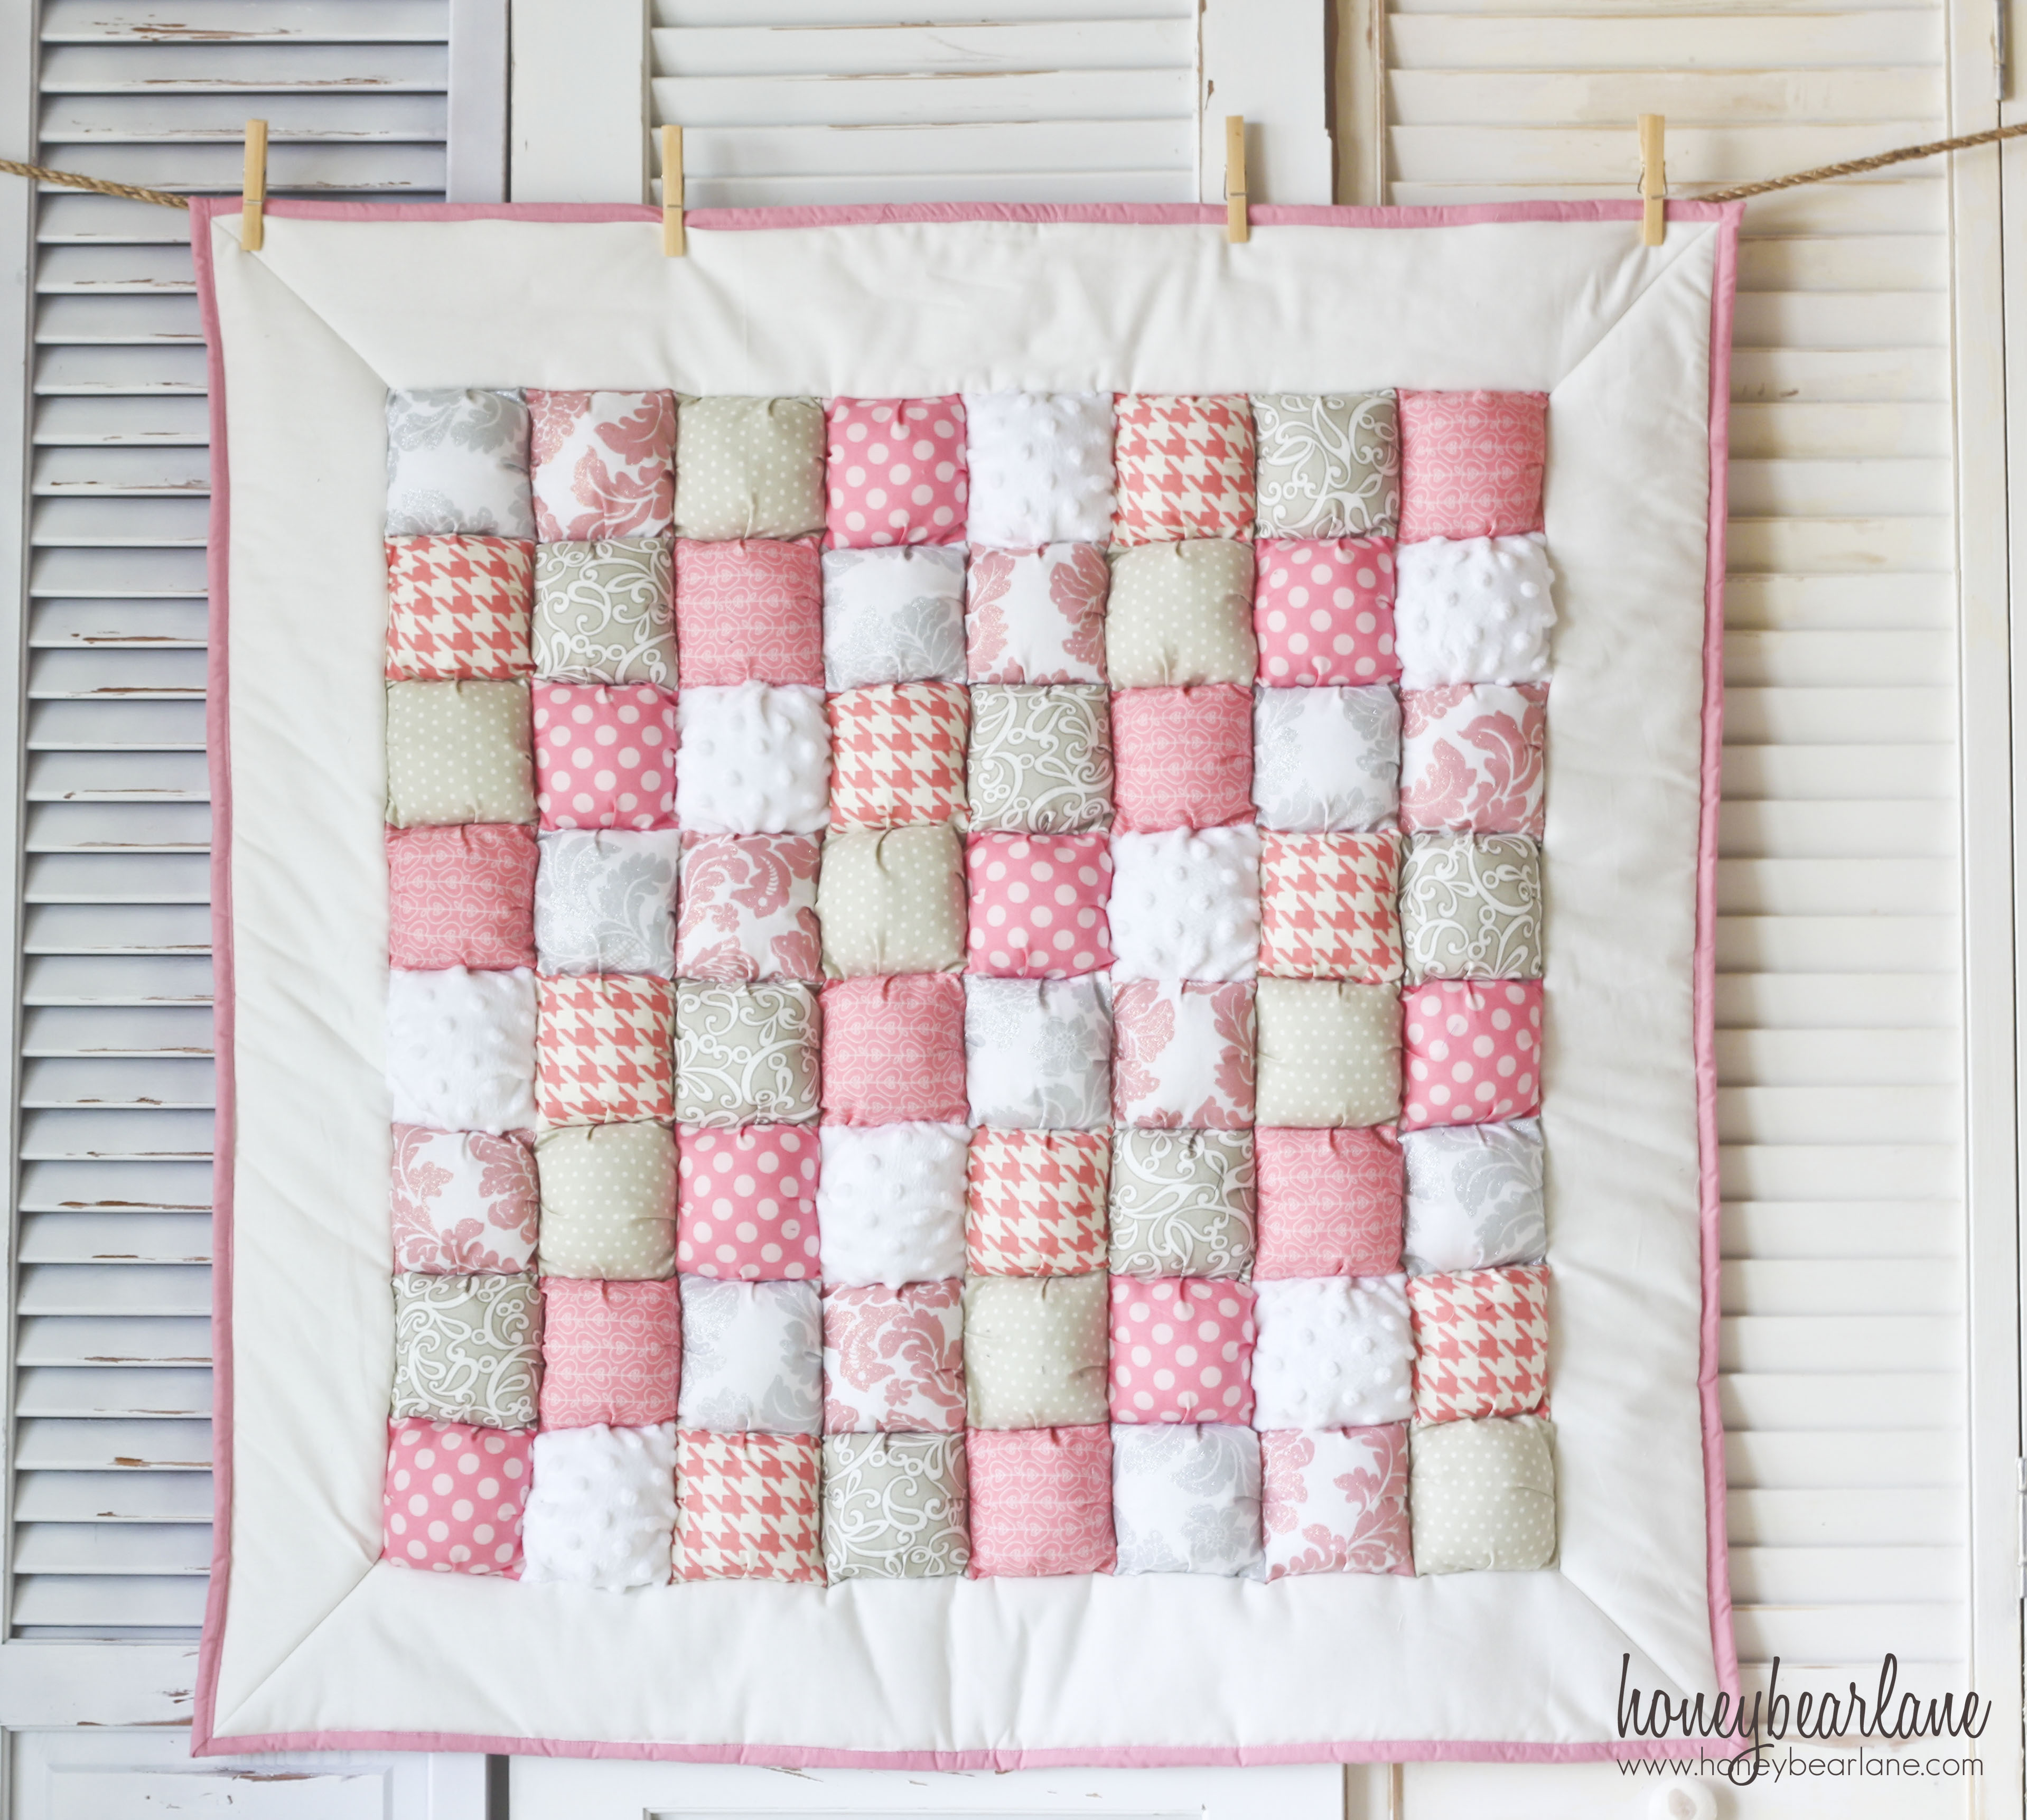 New Puff Quilts are Here! - HoneyBear Lane3837 x 3445